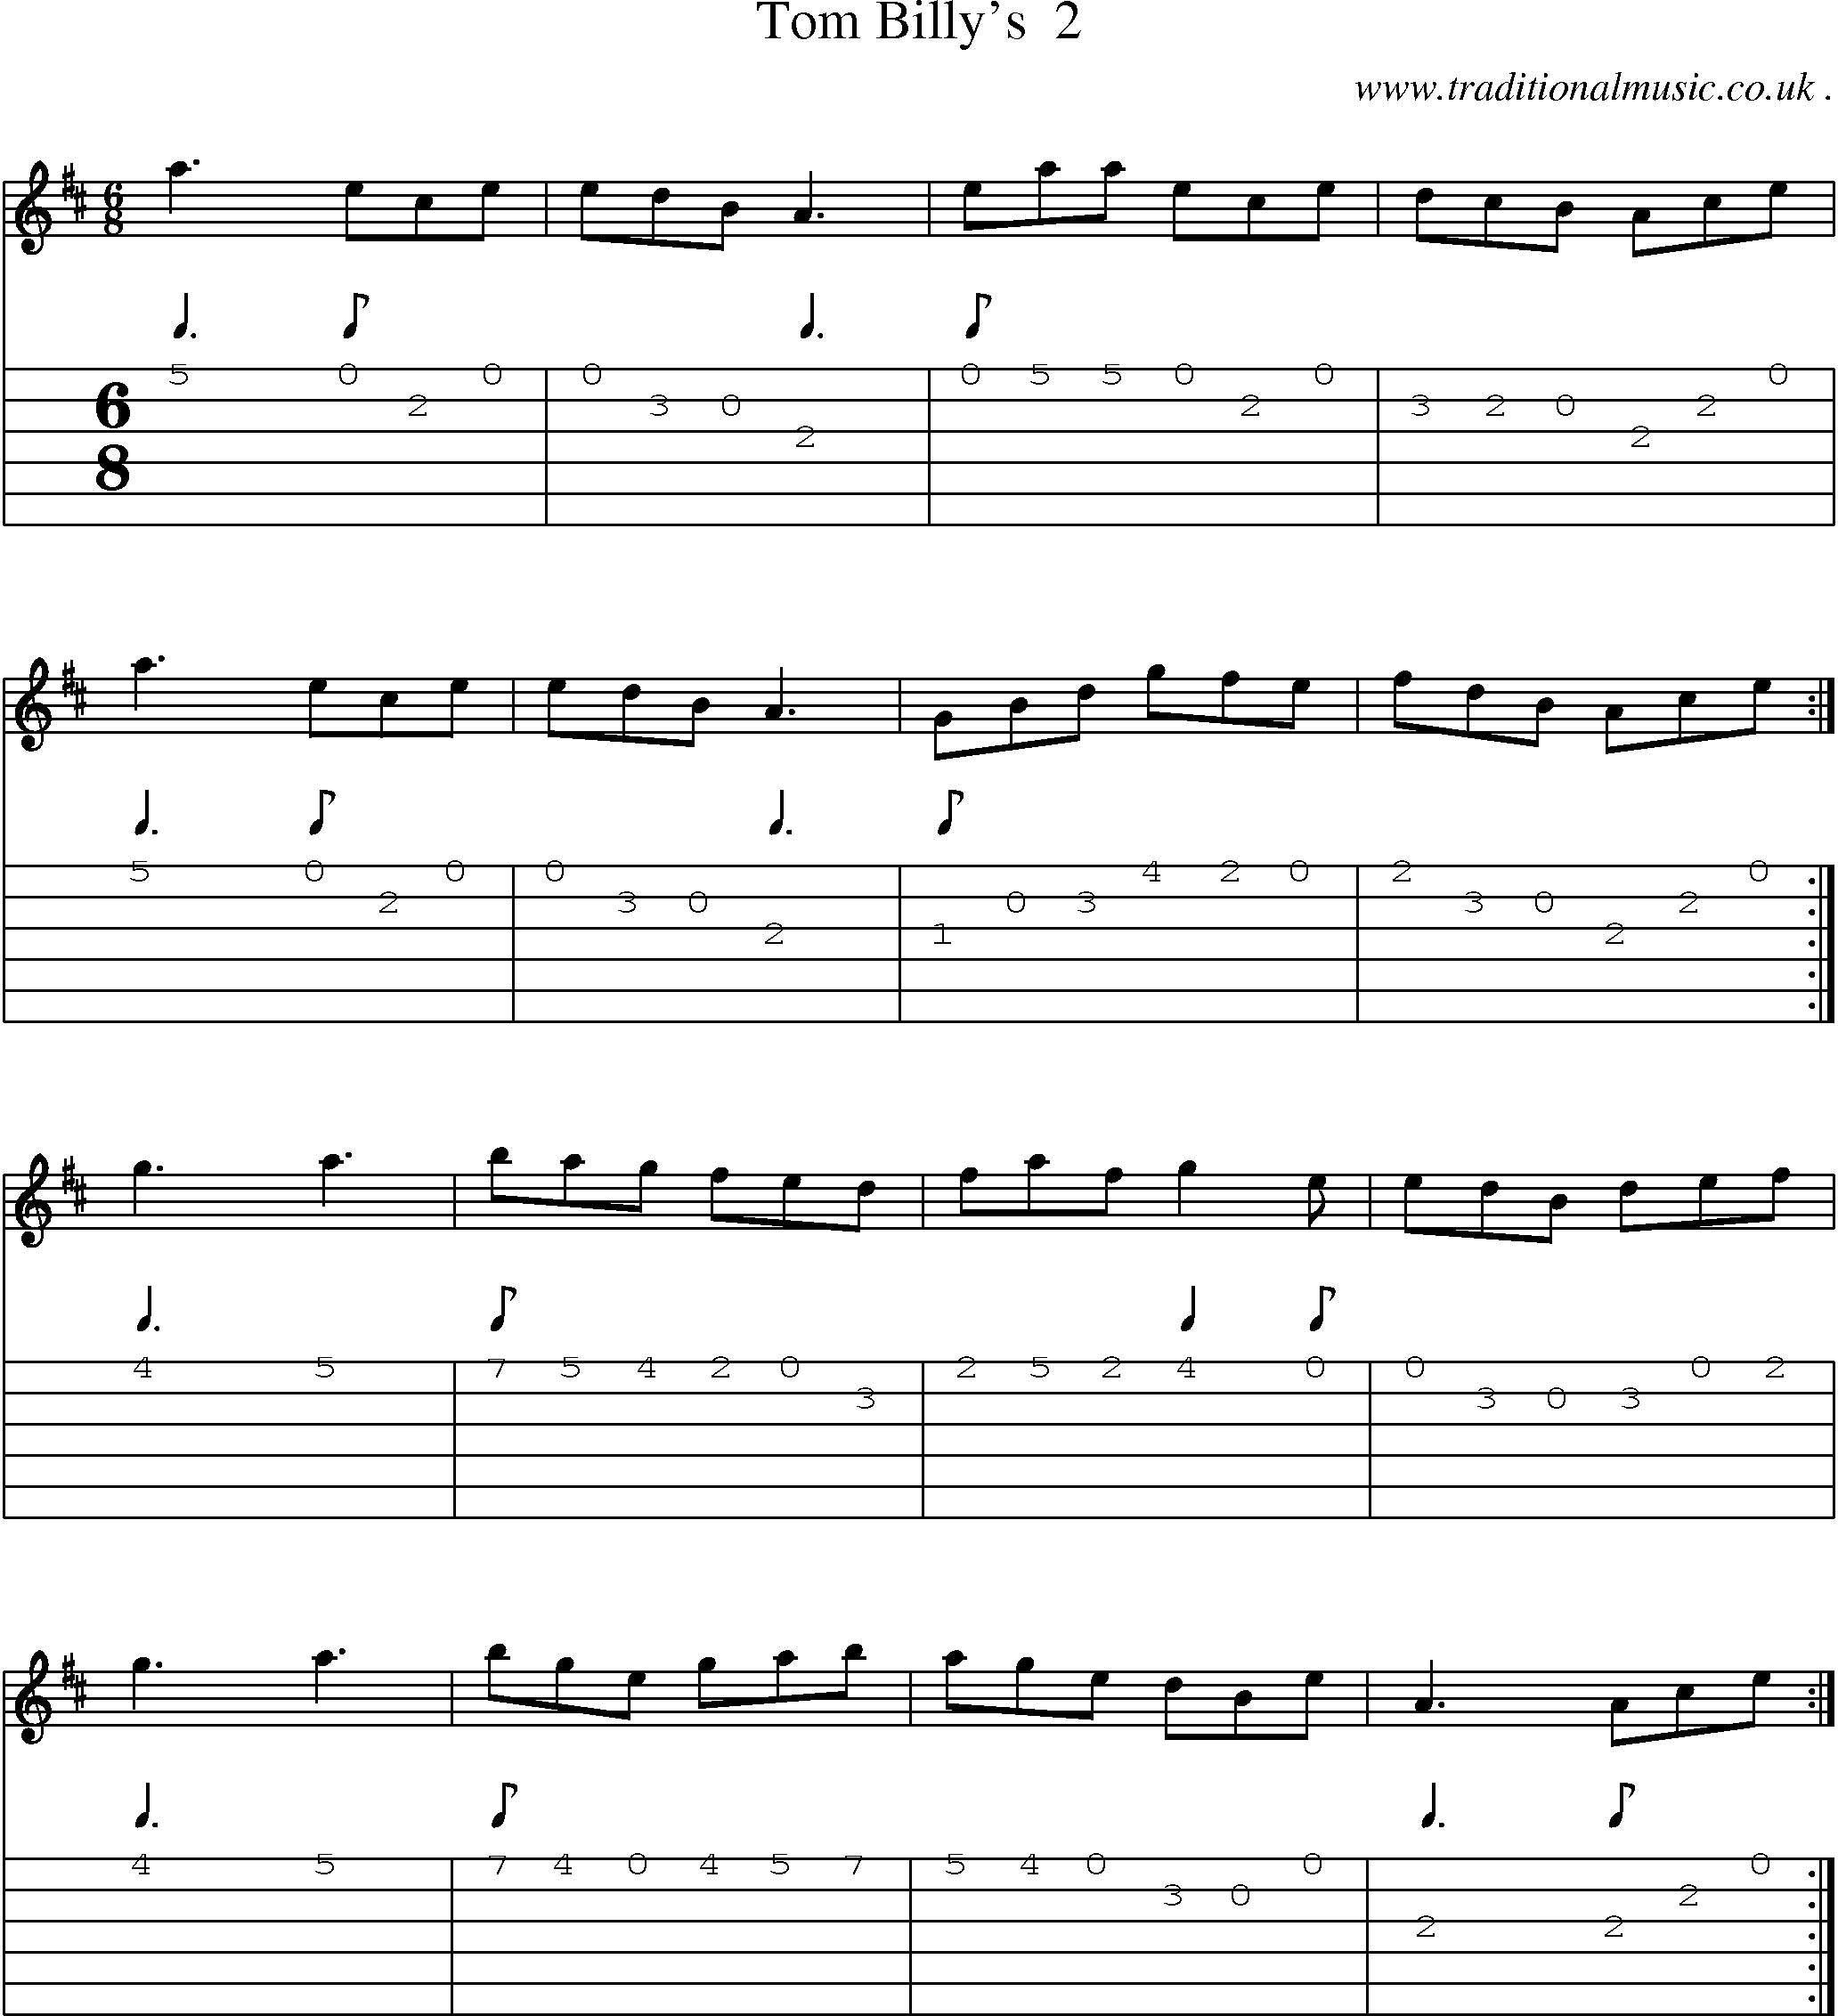 Sheet-Music and Guitar Tabs for Tom Billys 2